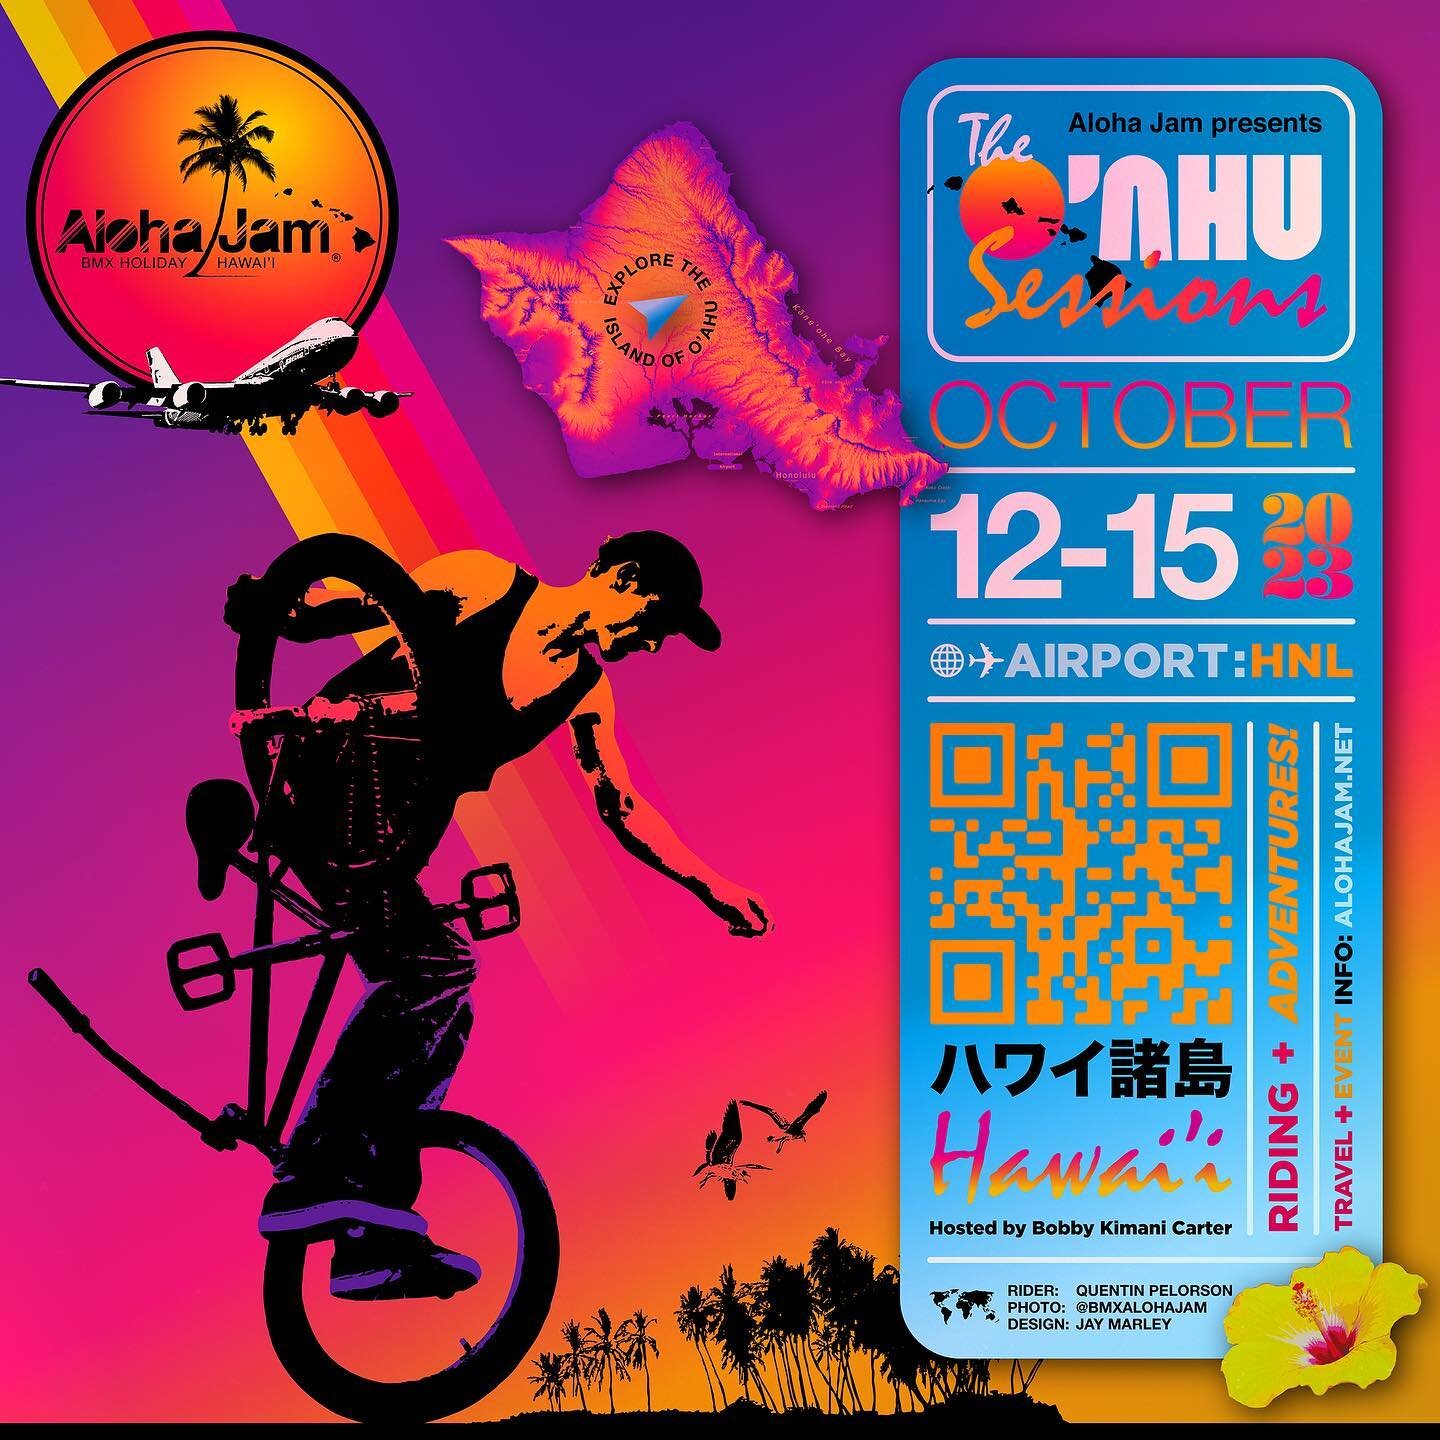 We&rsquo;re on for 2023!

OCT 12 - 15, 2023 on the island of O&rsquo;ahu

Aloha Jam is more than just a jam it&rsquo;s a BMX Holiday!  This year&rsquo;s edition, &ldquo;The O&rsquo;ahu Sessions&rdquo;, consists of 3 epic flatland sessions at differen